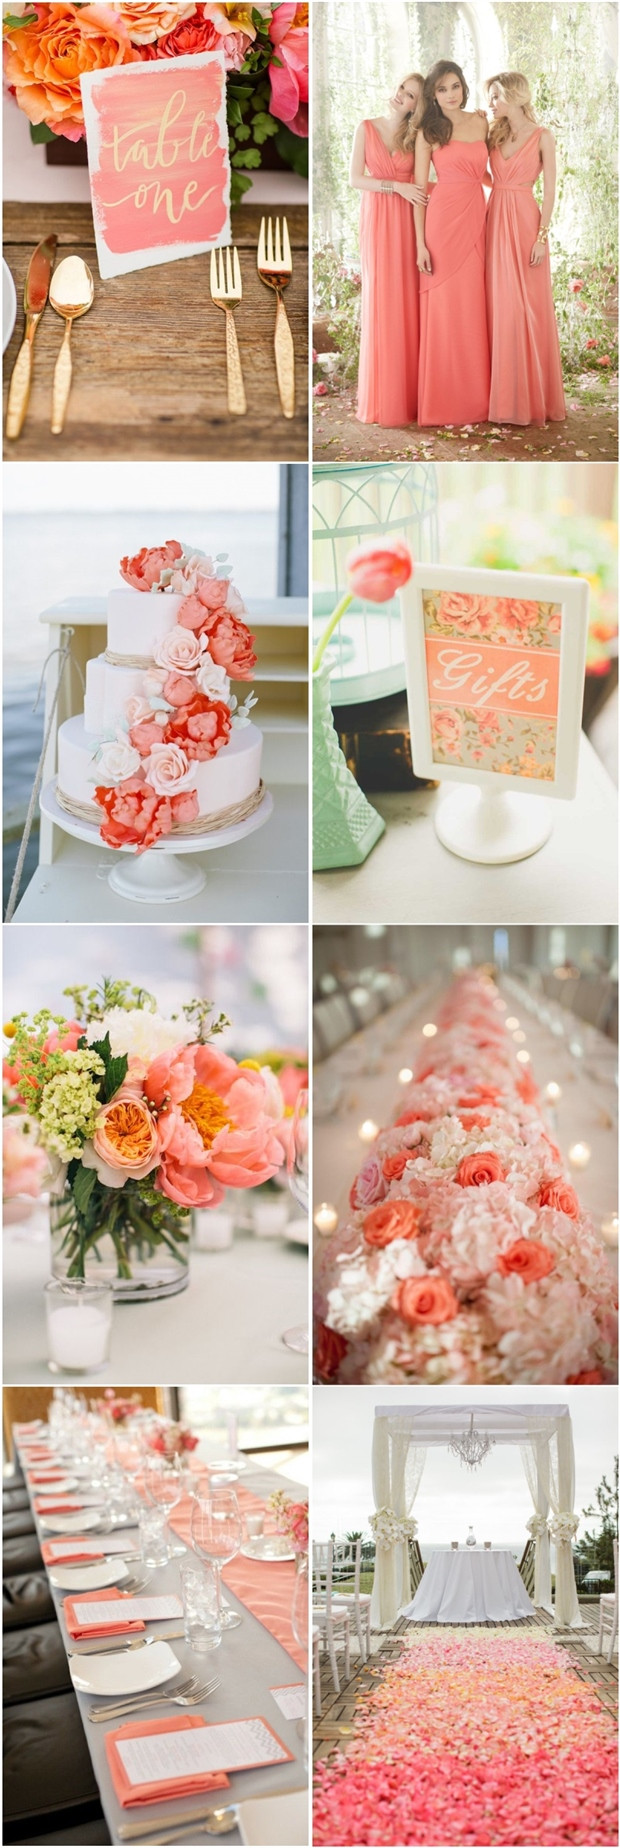 Coral Color Wedding
 45 Coral Wedding Color Ideas You Don t Want to Overlook